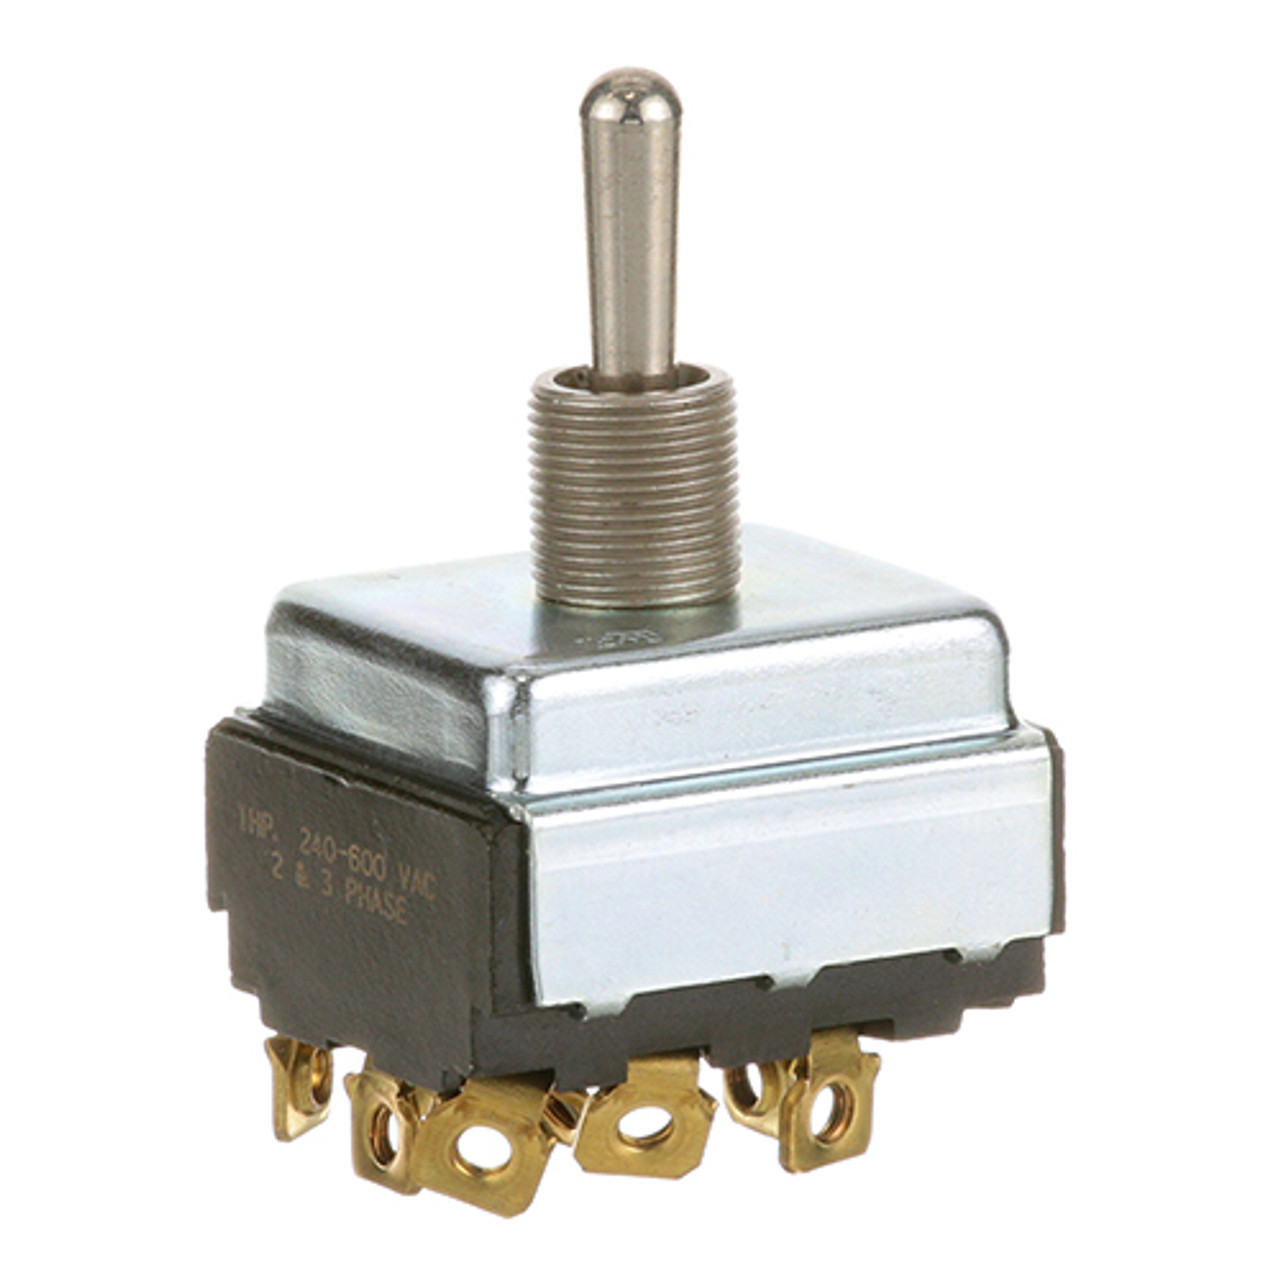 Toggle Switch 1/2 3Pdt, Ctr-Off - Replacement Part For Frymaster 1074